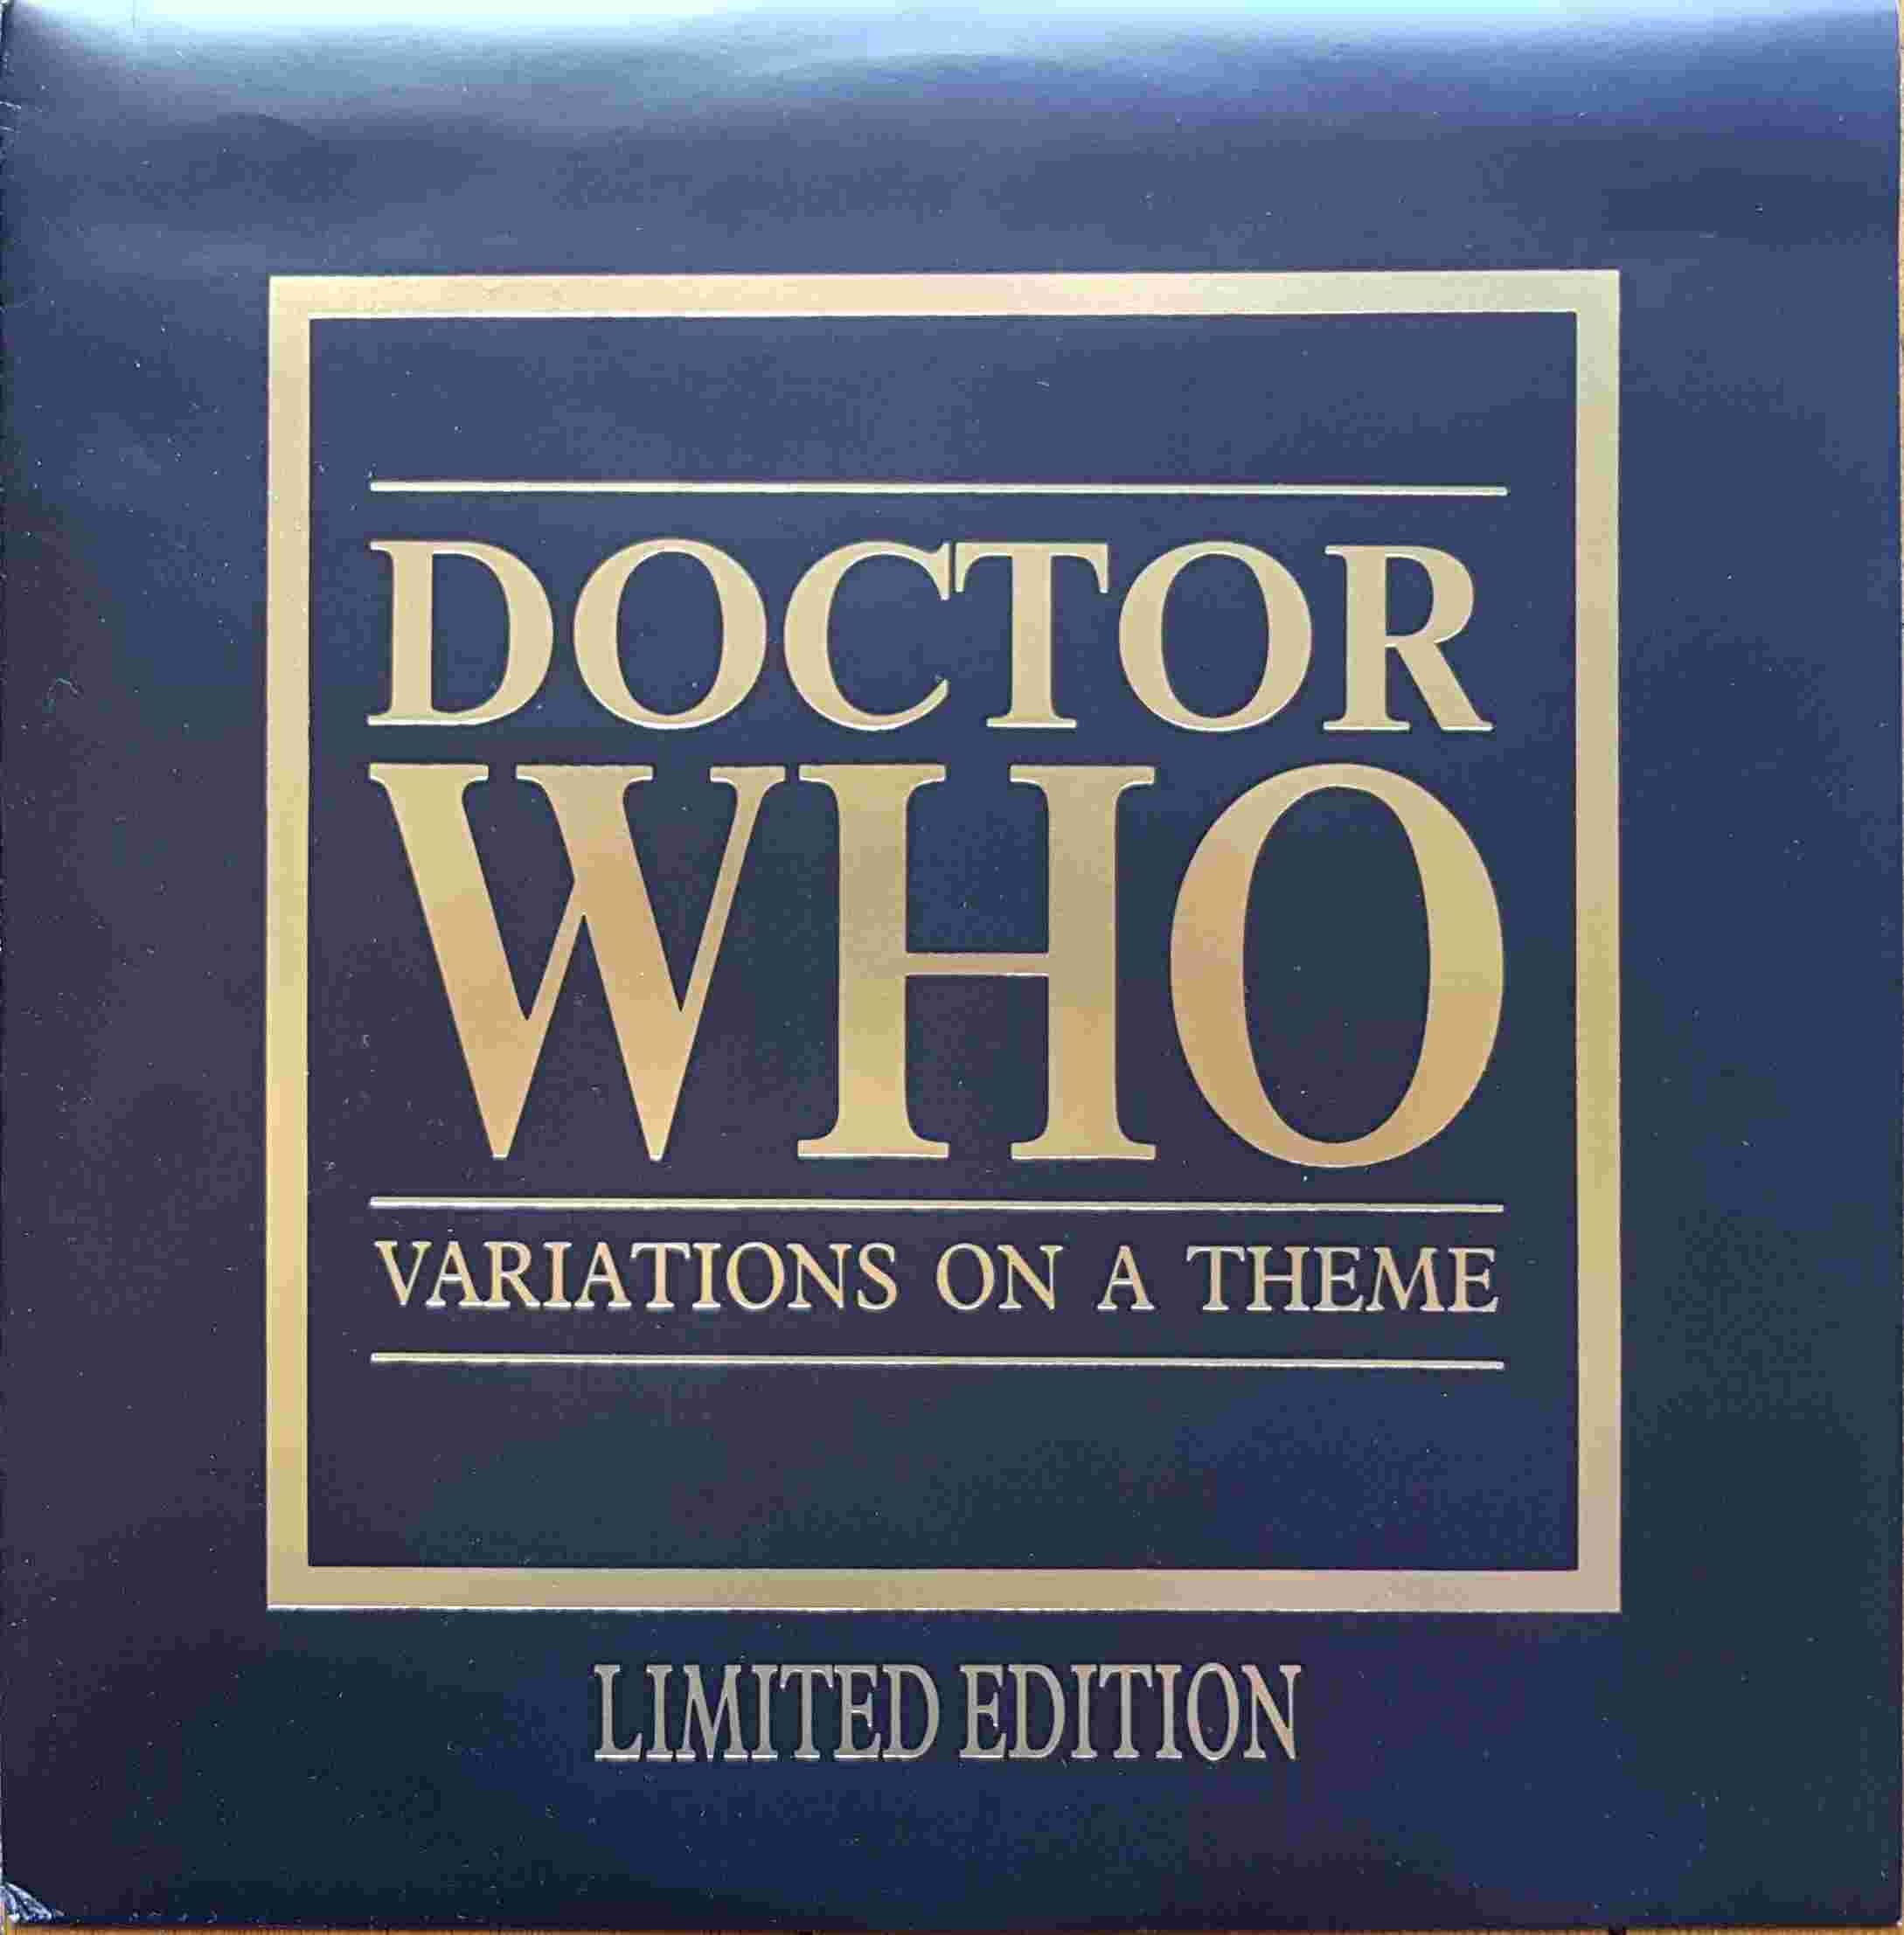 Picture of Doctor Who - Variations on a theme by artist Ron Grainer from the BBC 12inches - Records and Tapes library